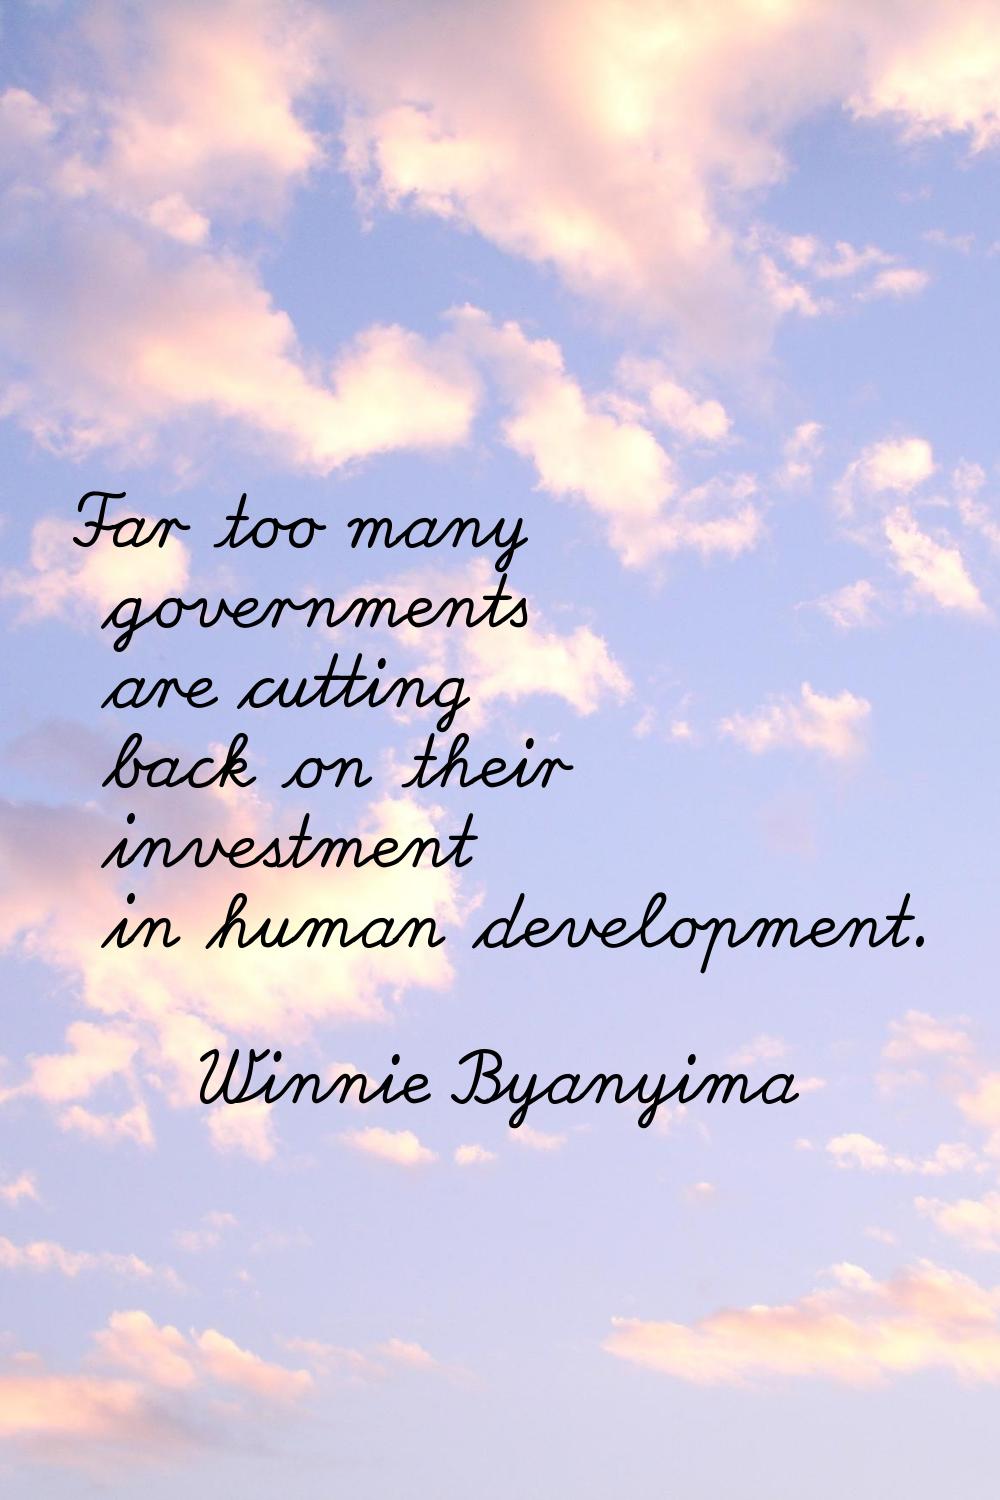 Far too many governments are cutting back on their investment in human development.